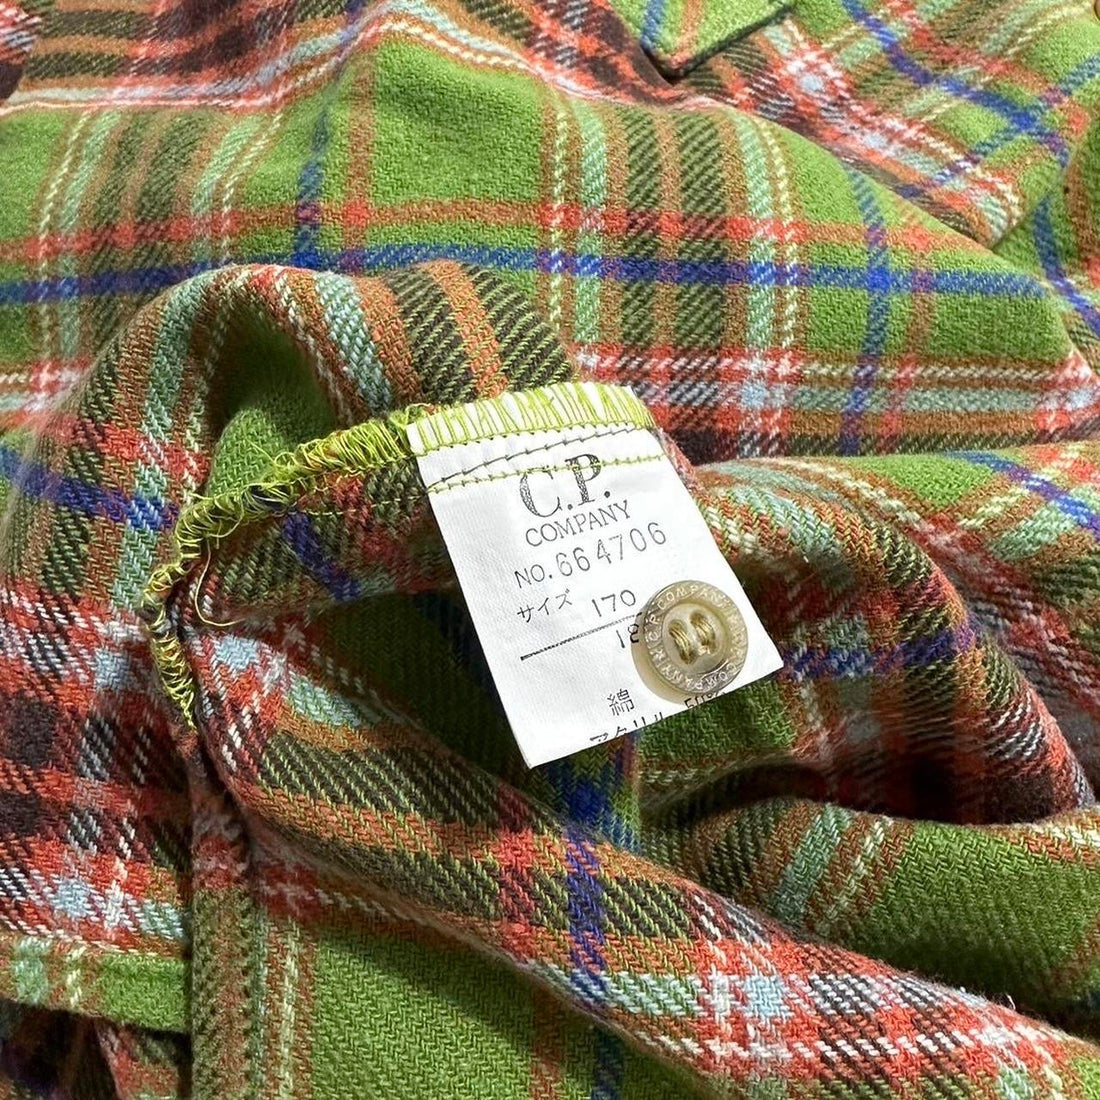 CP Company Asia Exclusive Wool Flannel Shirt